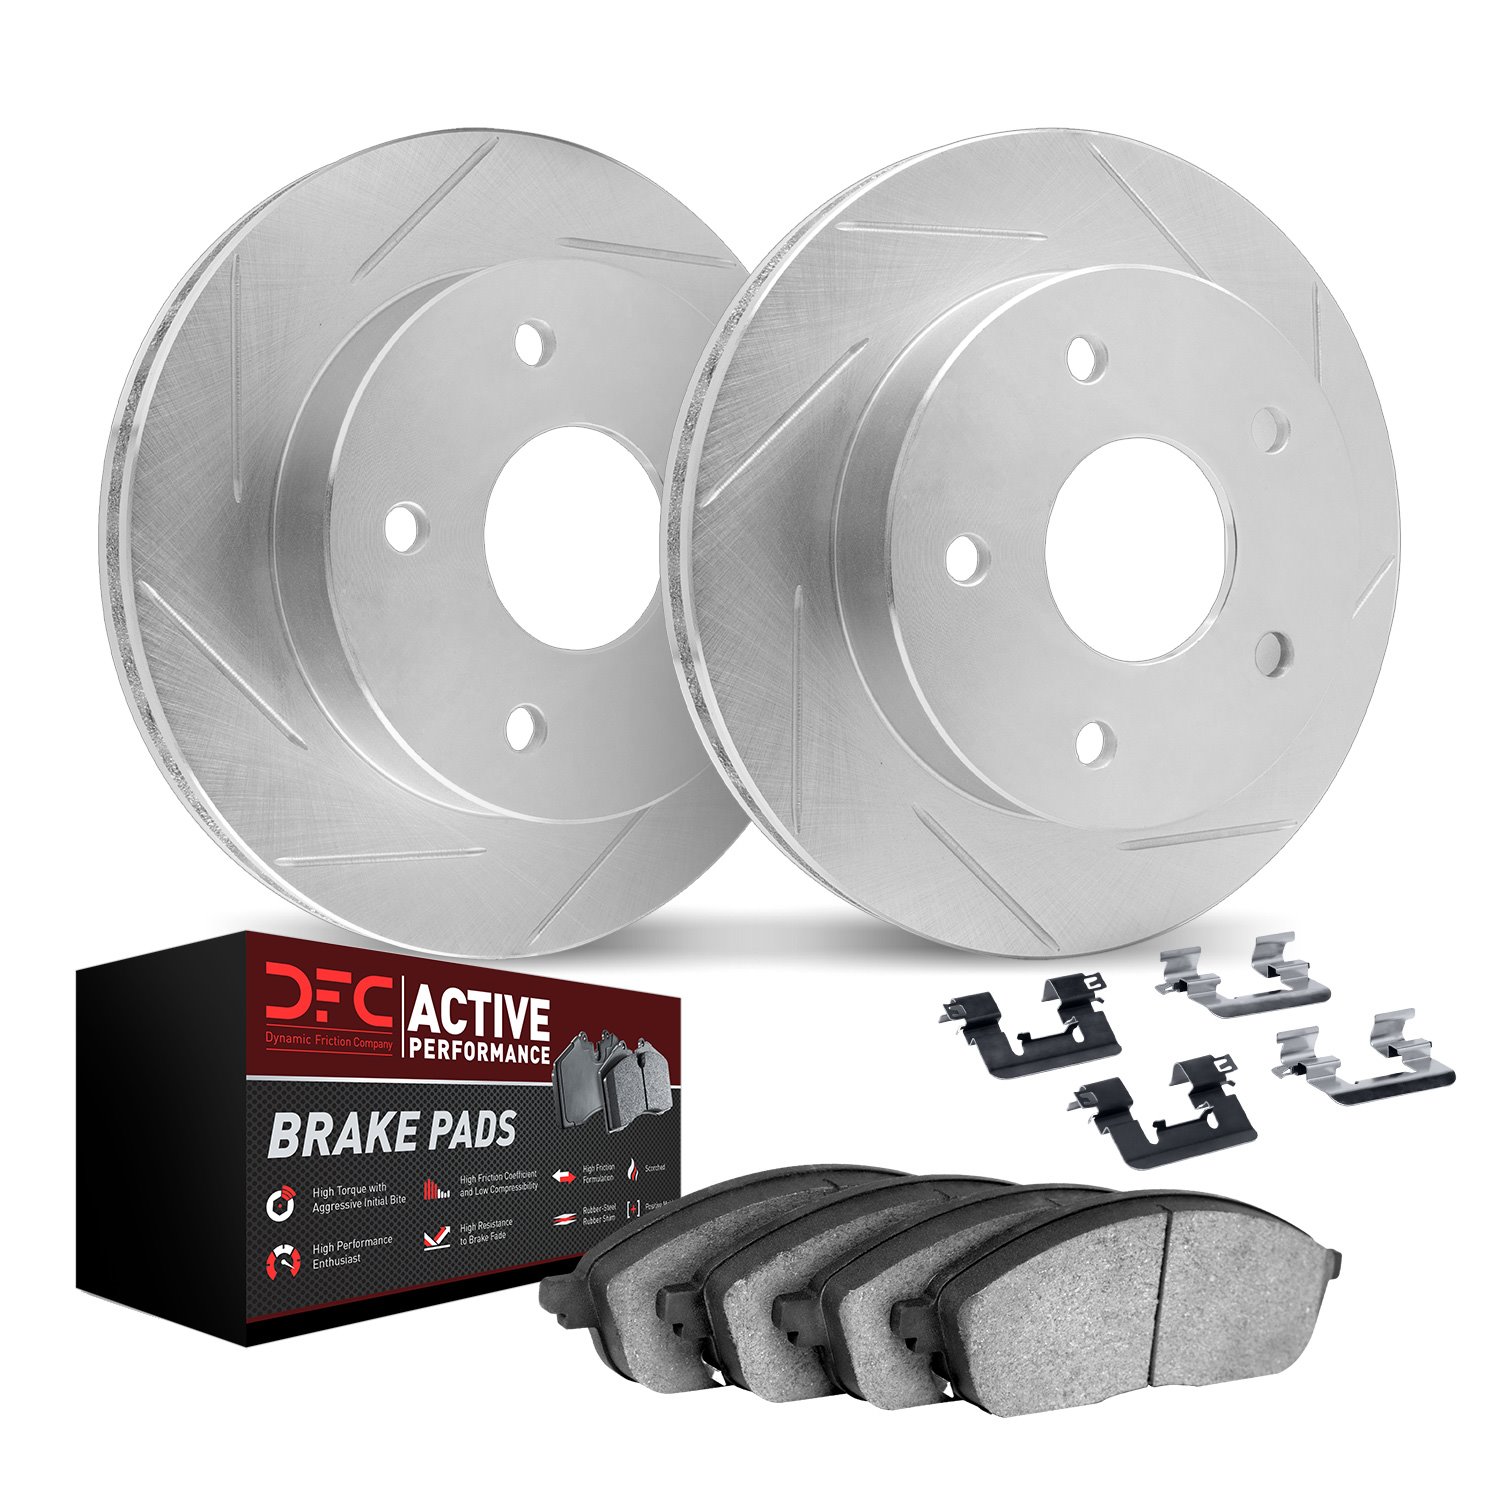 2712-54084 Geoperformance Slotted Brake Rotors with Active Performance Pads Kits & Hardware, 2013-2014 Ford/Lincoln/Mercury/Mazd